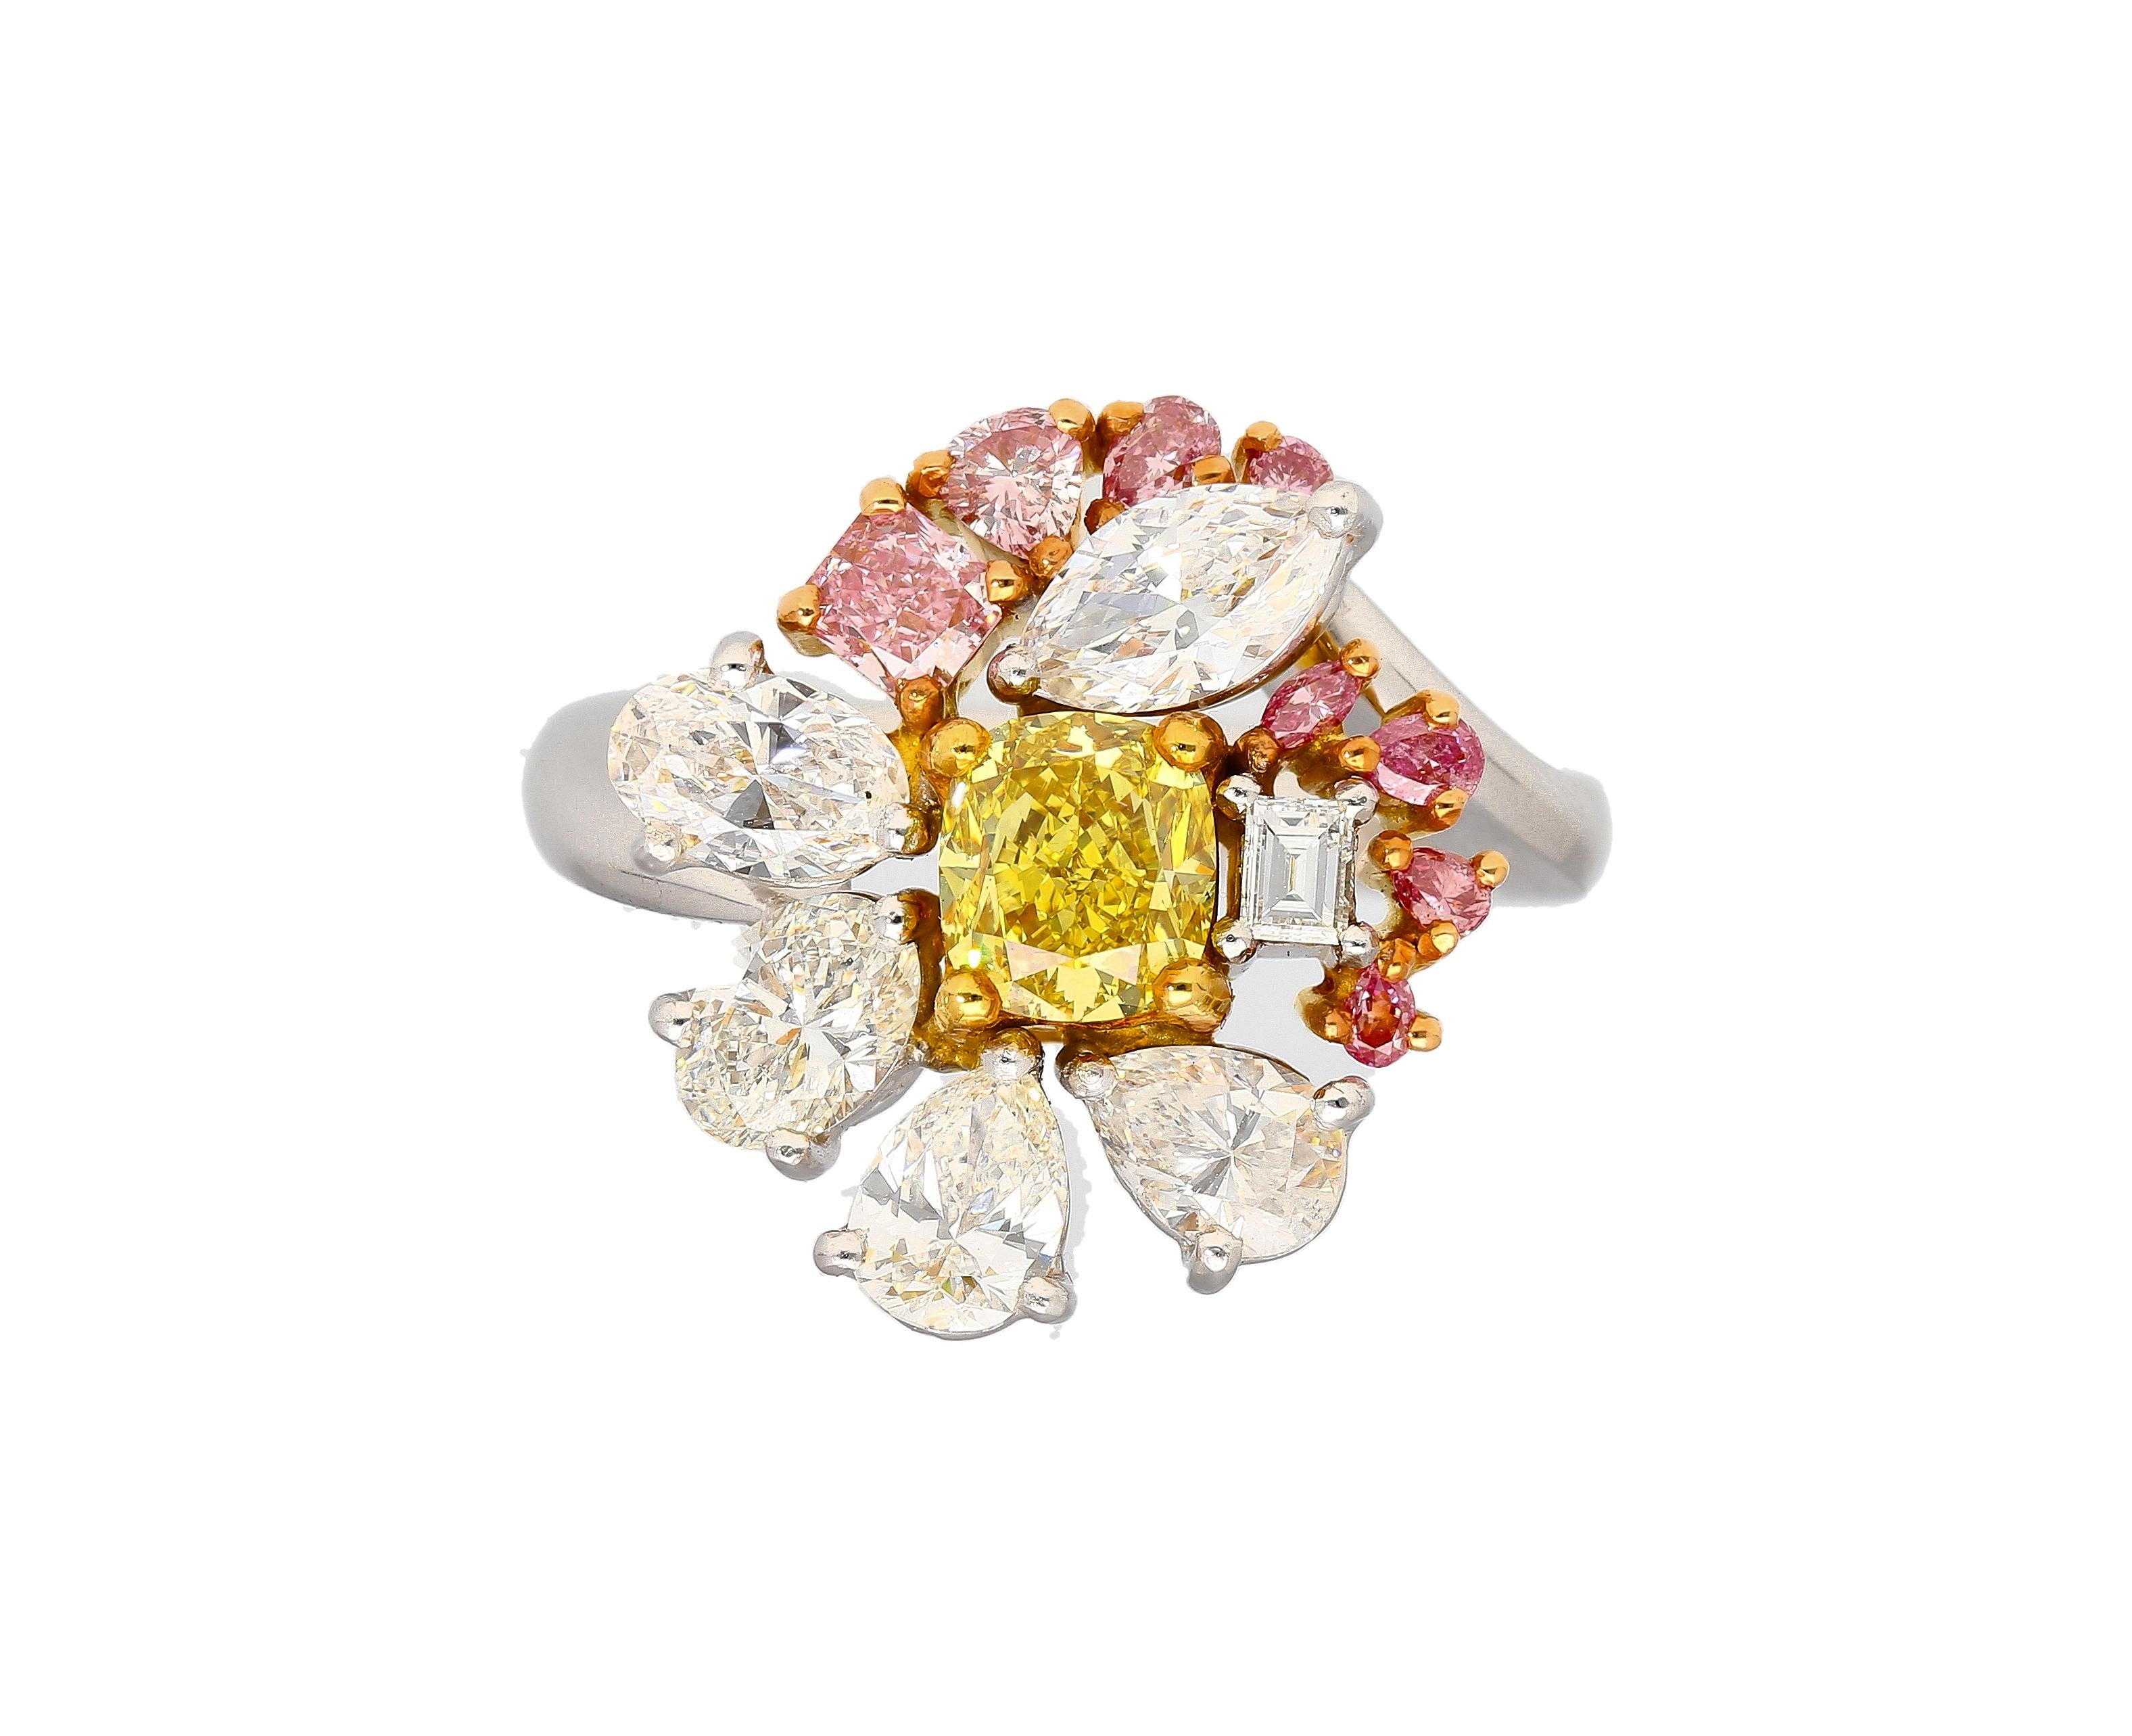 Cushion Cut GIA Certified Fancy Yellow, Pink and White Diamond Ring in Platinum 950 & 18K For Sale